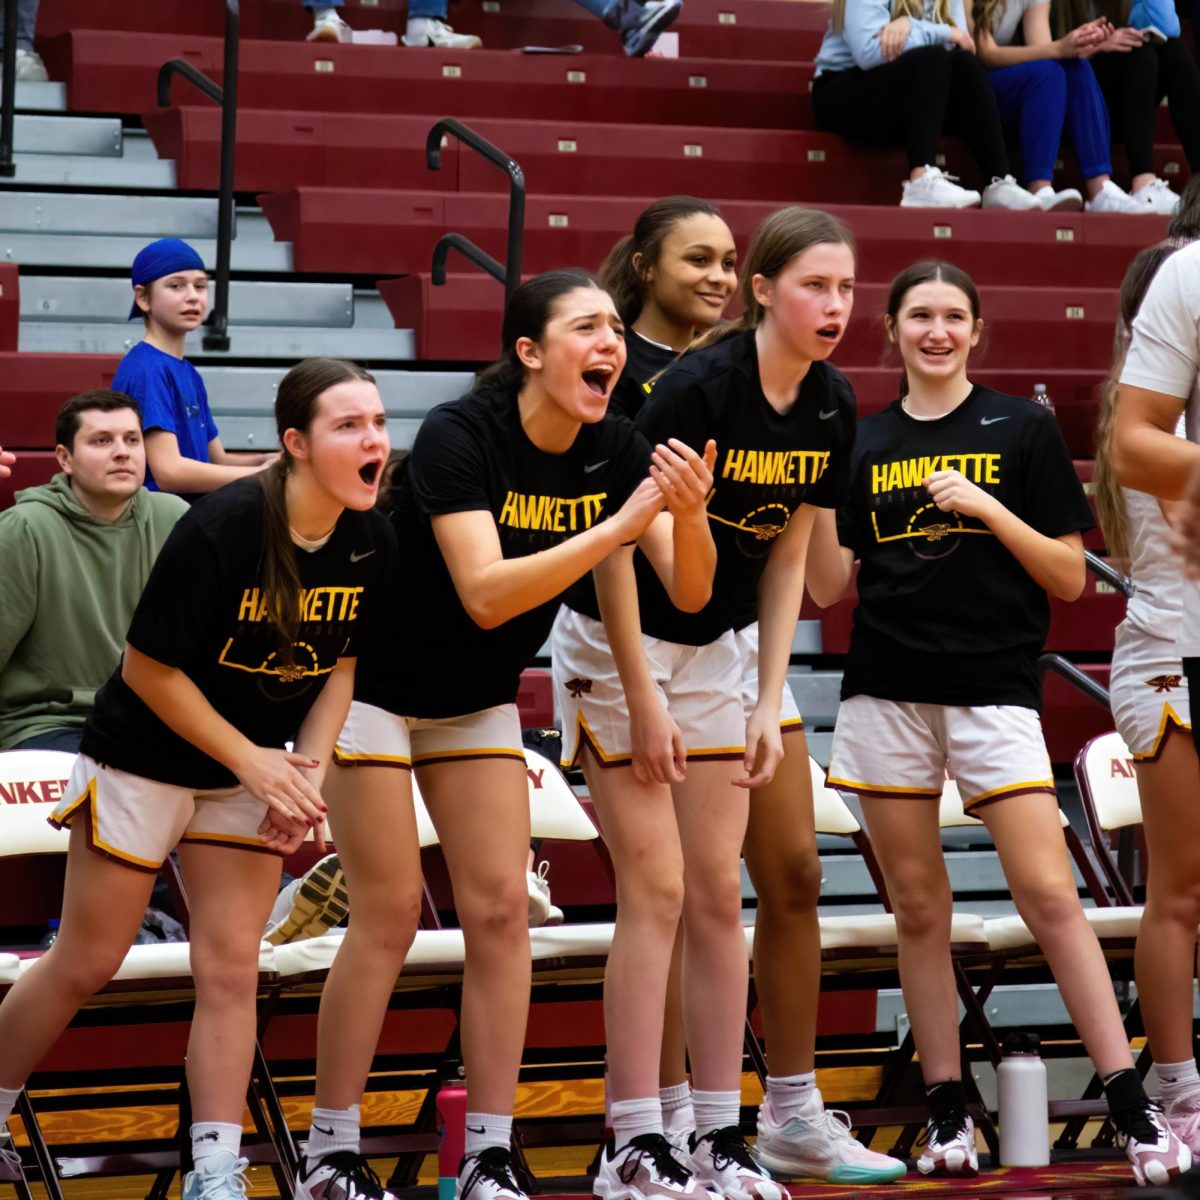 Ankeny+cheers+on+their+teammates+after+a+big+score.+The+Hawkettes+defeated+Urbandale+50-29.